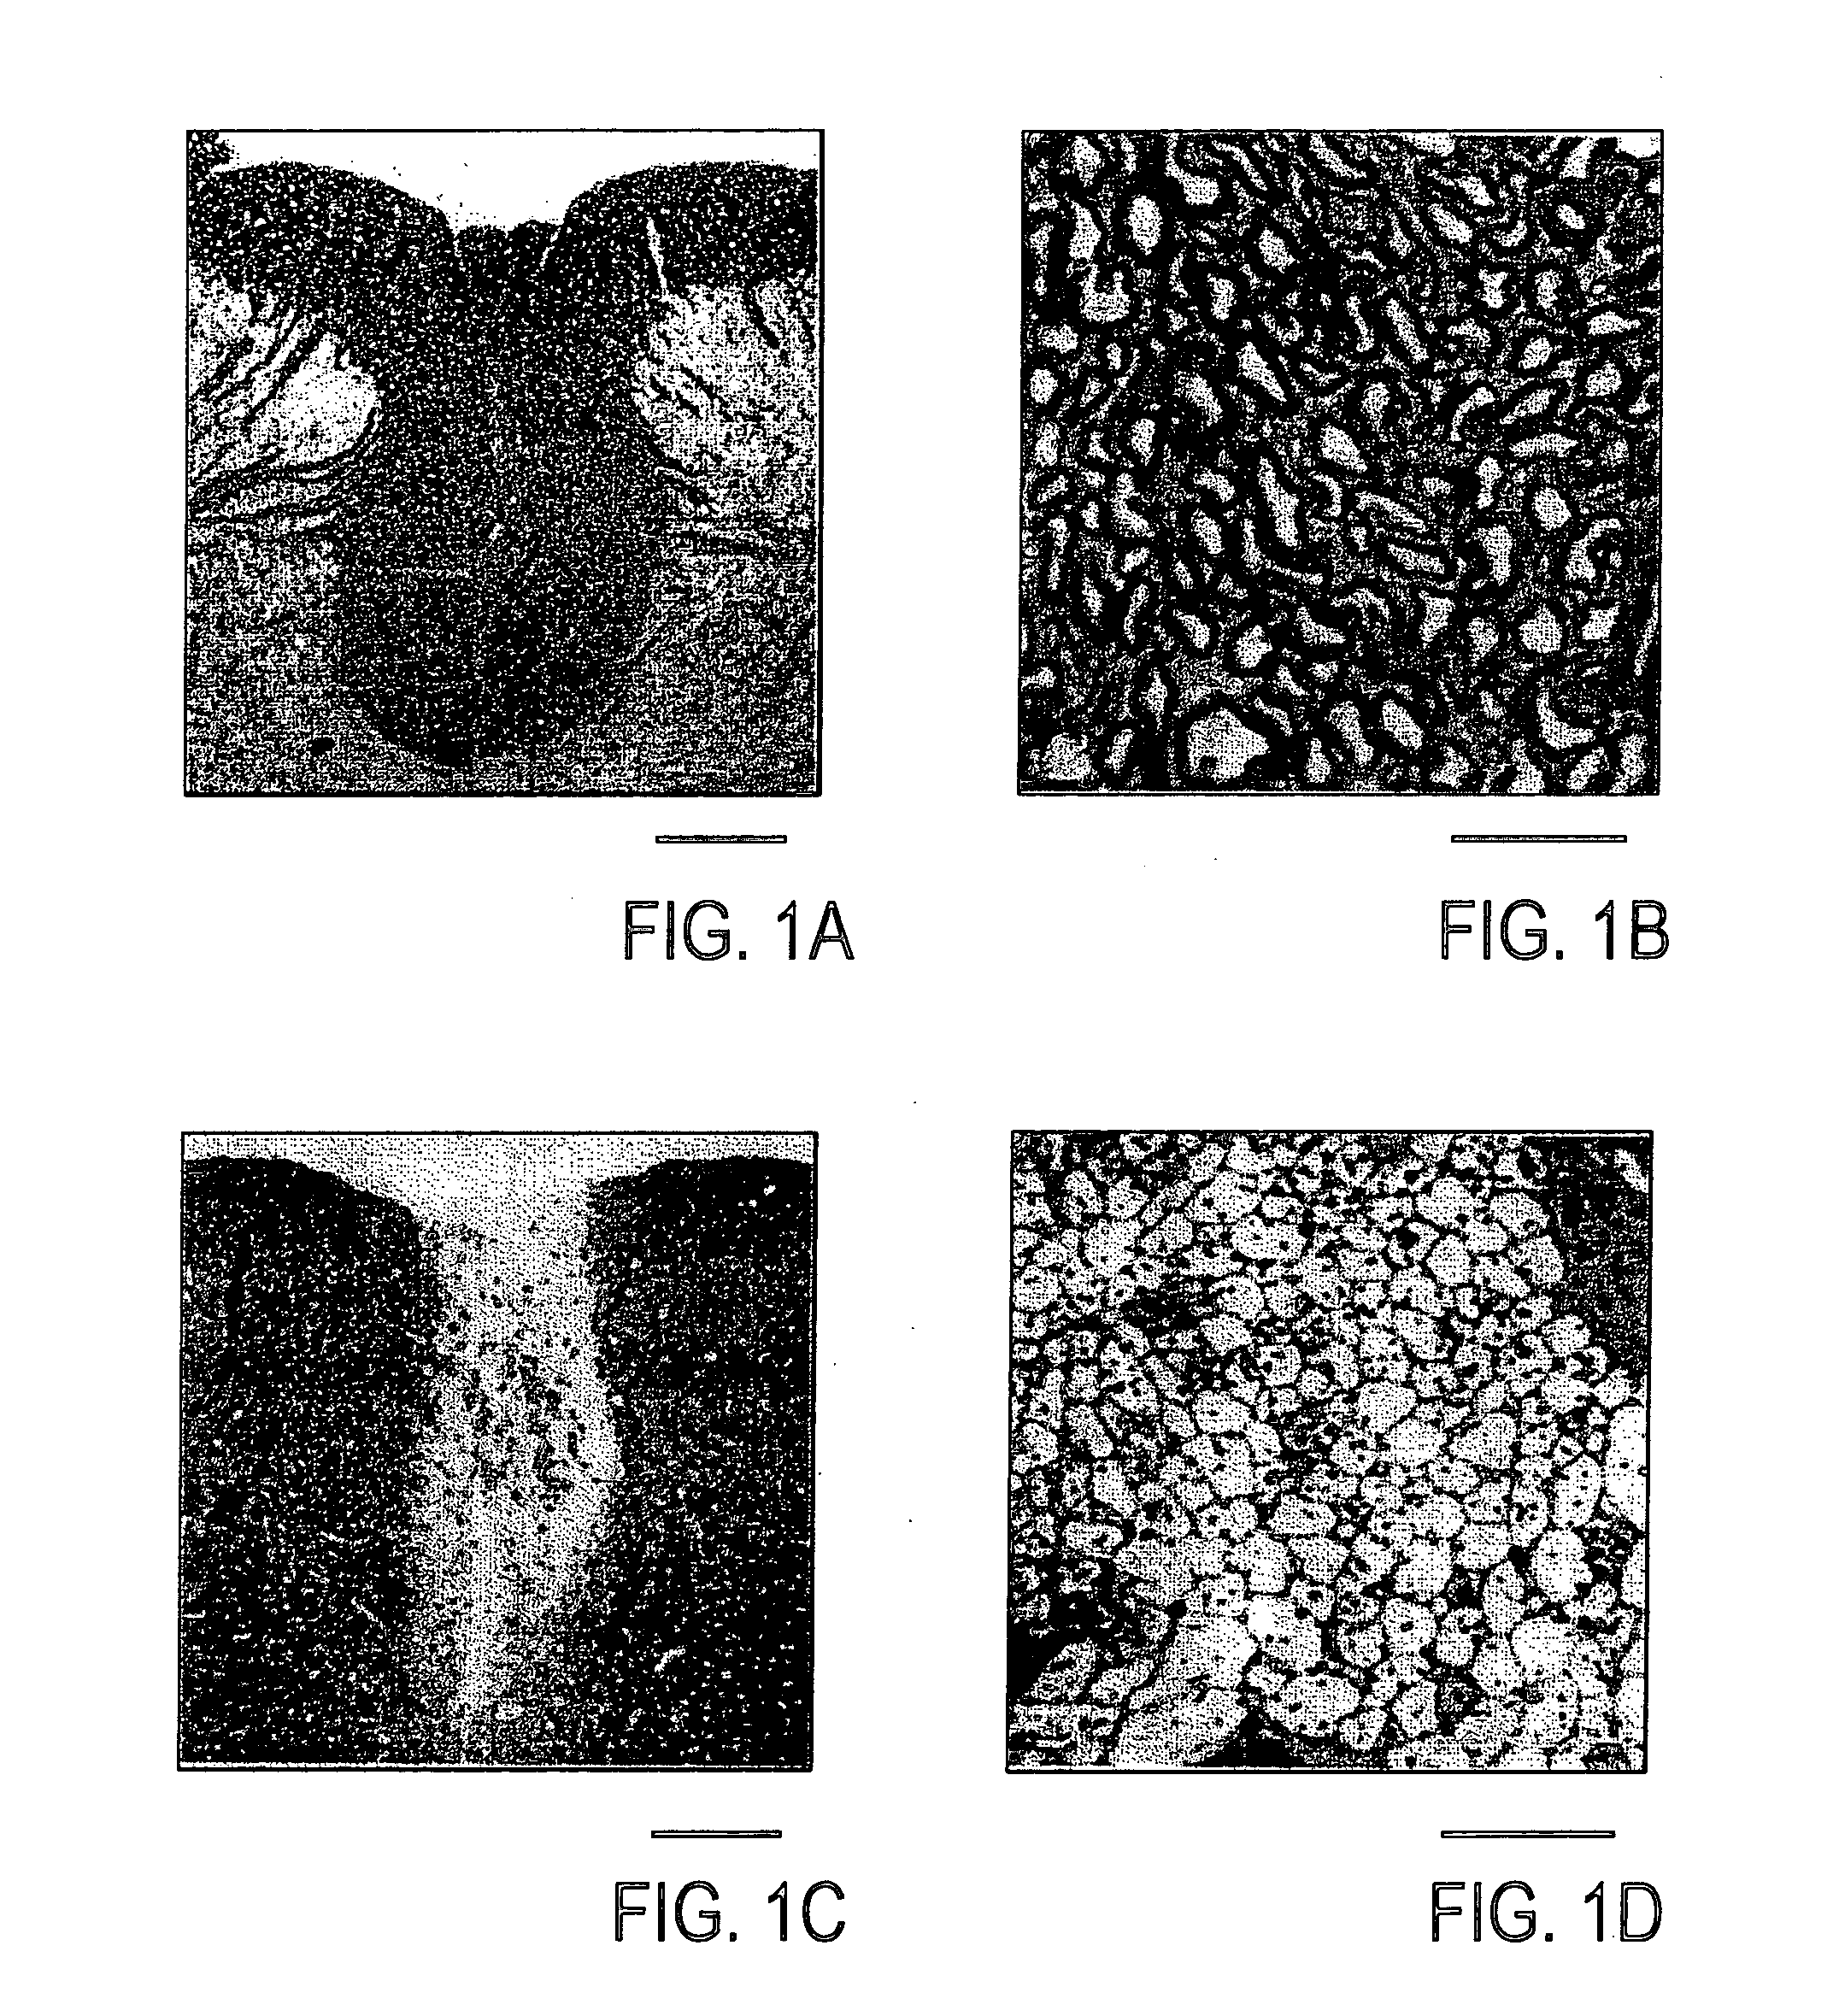 Cell fractions containing cells capable of differentiating into neural cells